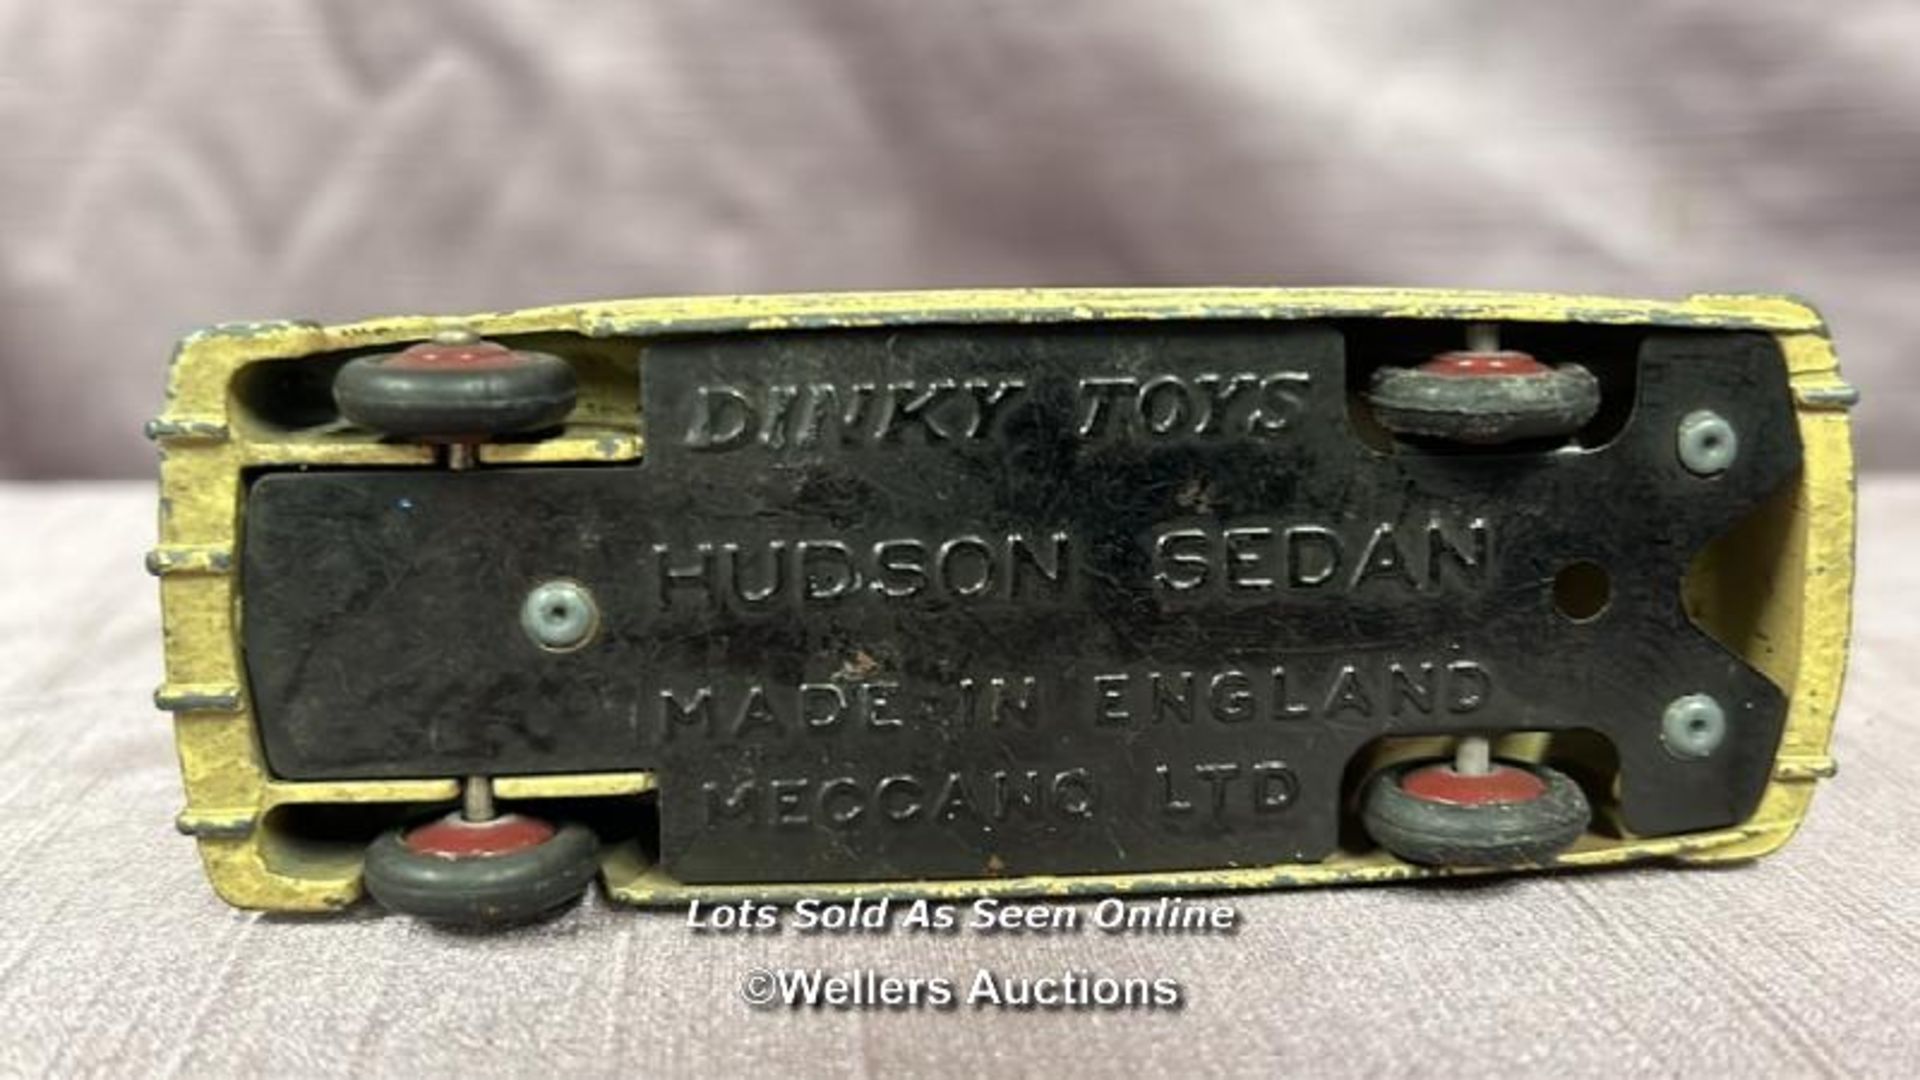 TWO DINKY HUDSON SEDAN DIE CAST CARS, ONE BLUE AND ONE CREAM - Image 3 of 5